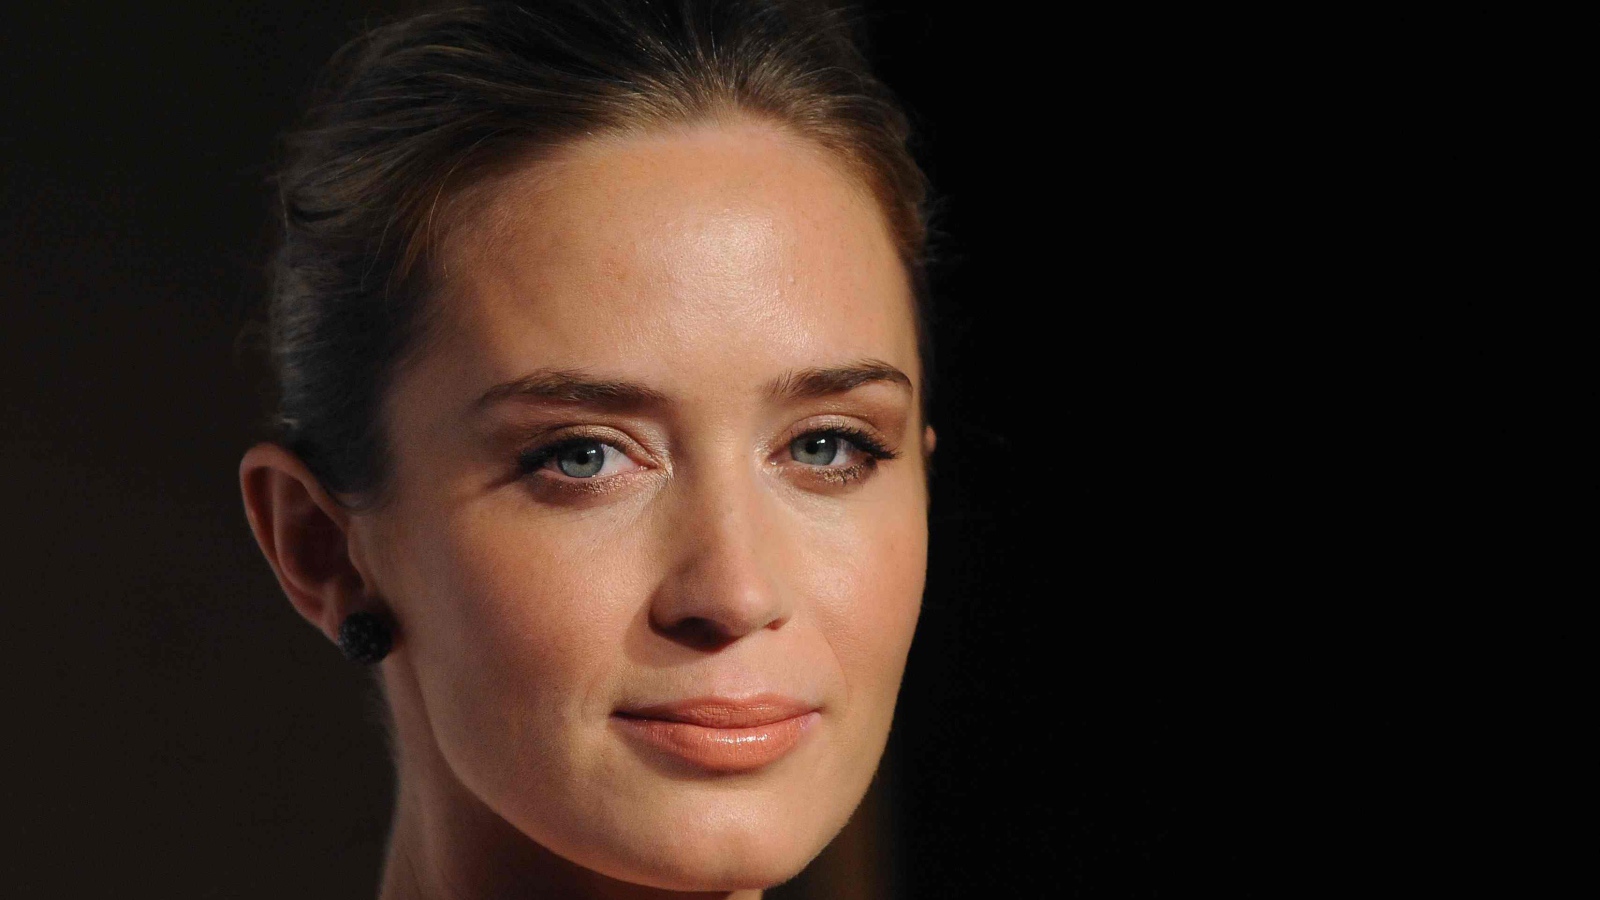 The beautiful face of actress Emily Blunt